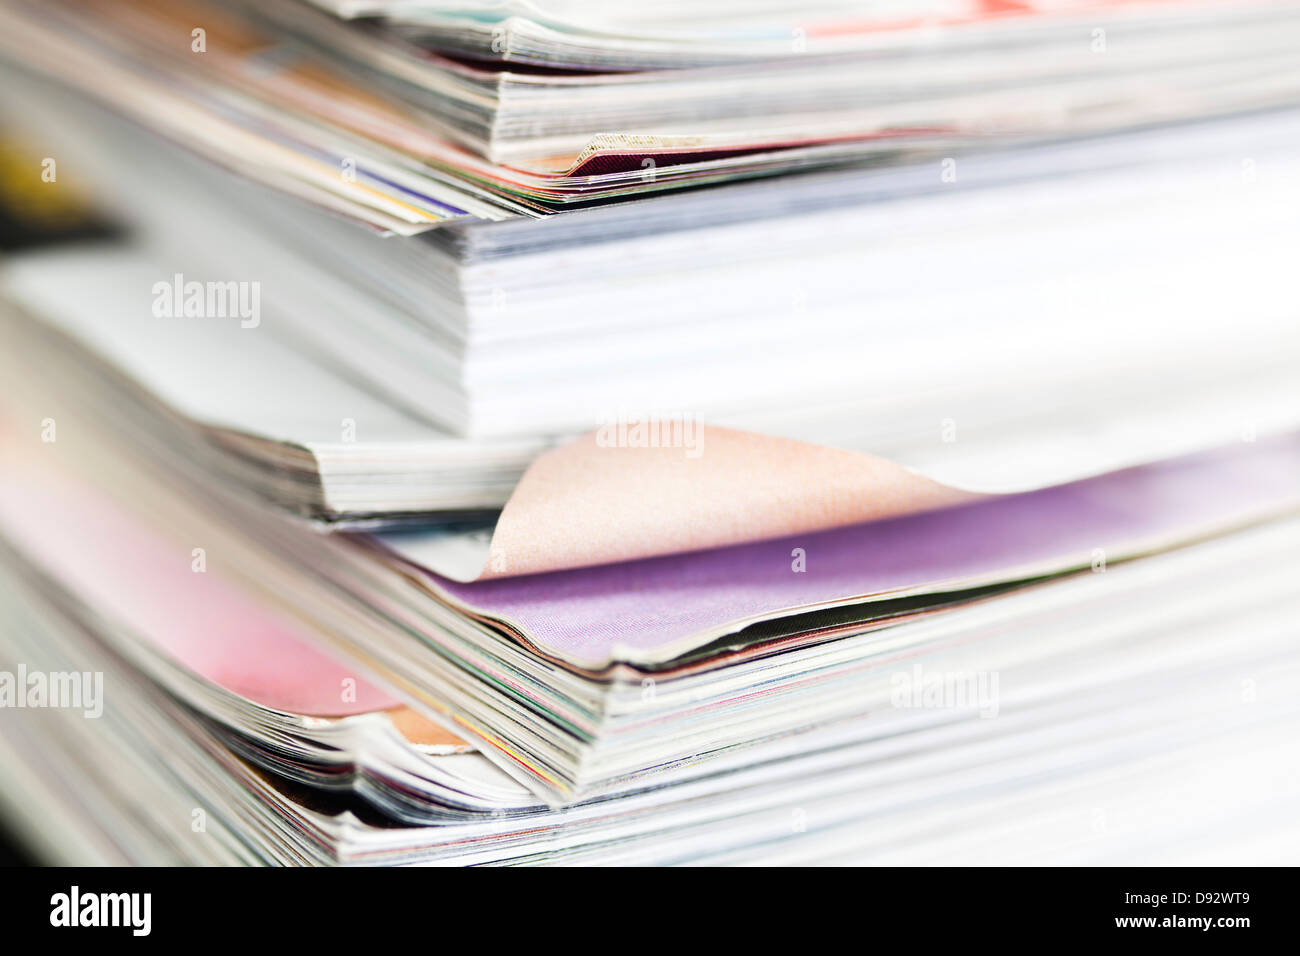 Stack of old magazines stock image. Image of press, pages - 5932189